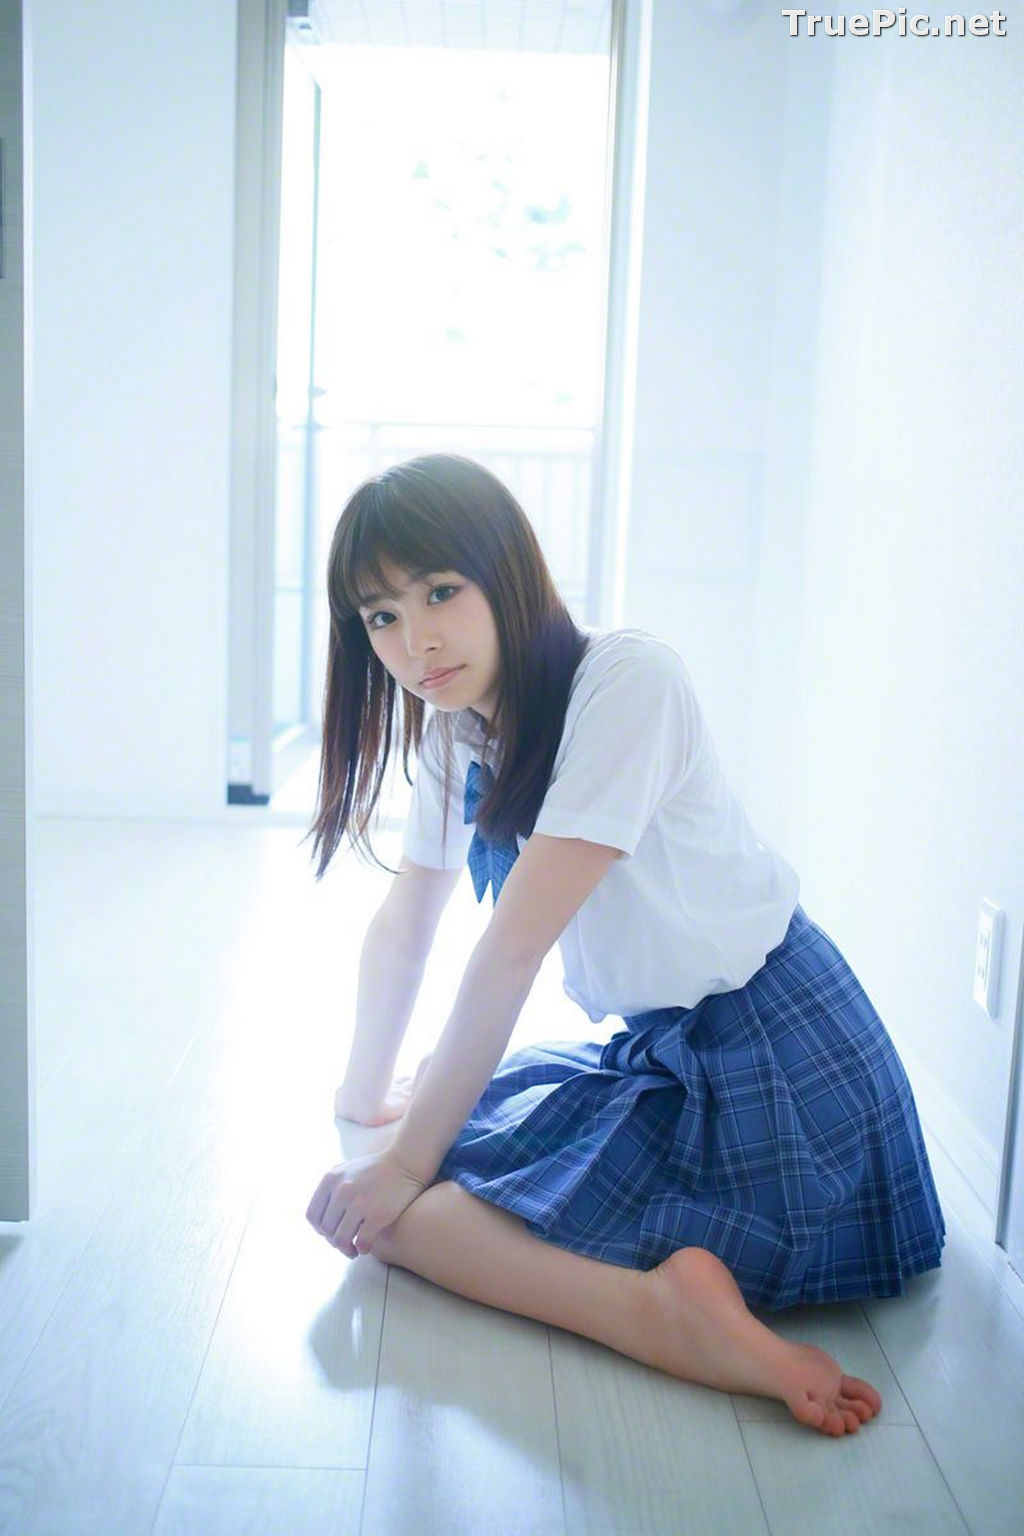 Image Wanibooks No.139-140 - Japanese Voice Actress and Singer - Rena Sato - TruePic.net - Picture-75